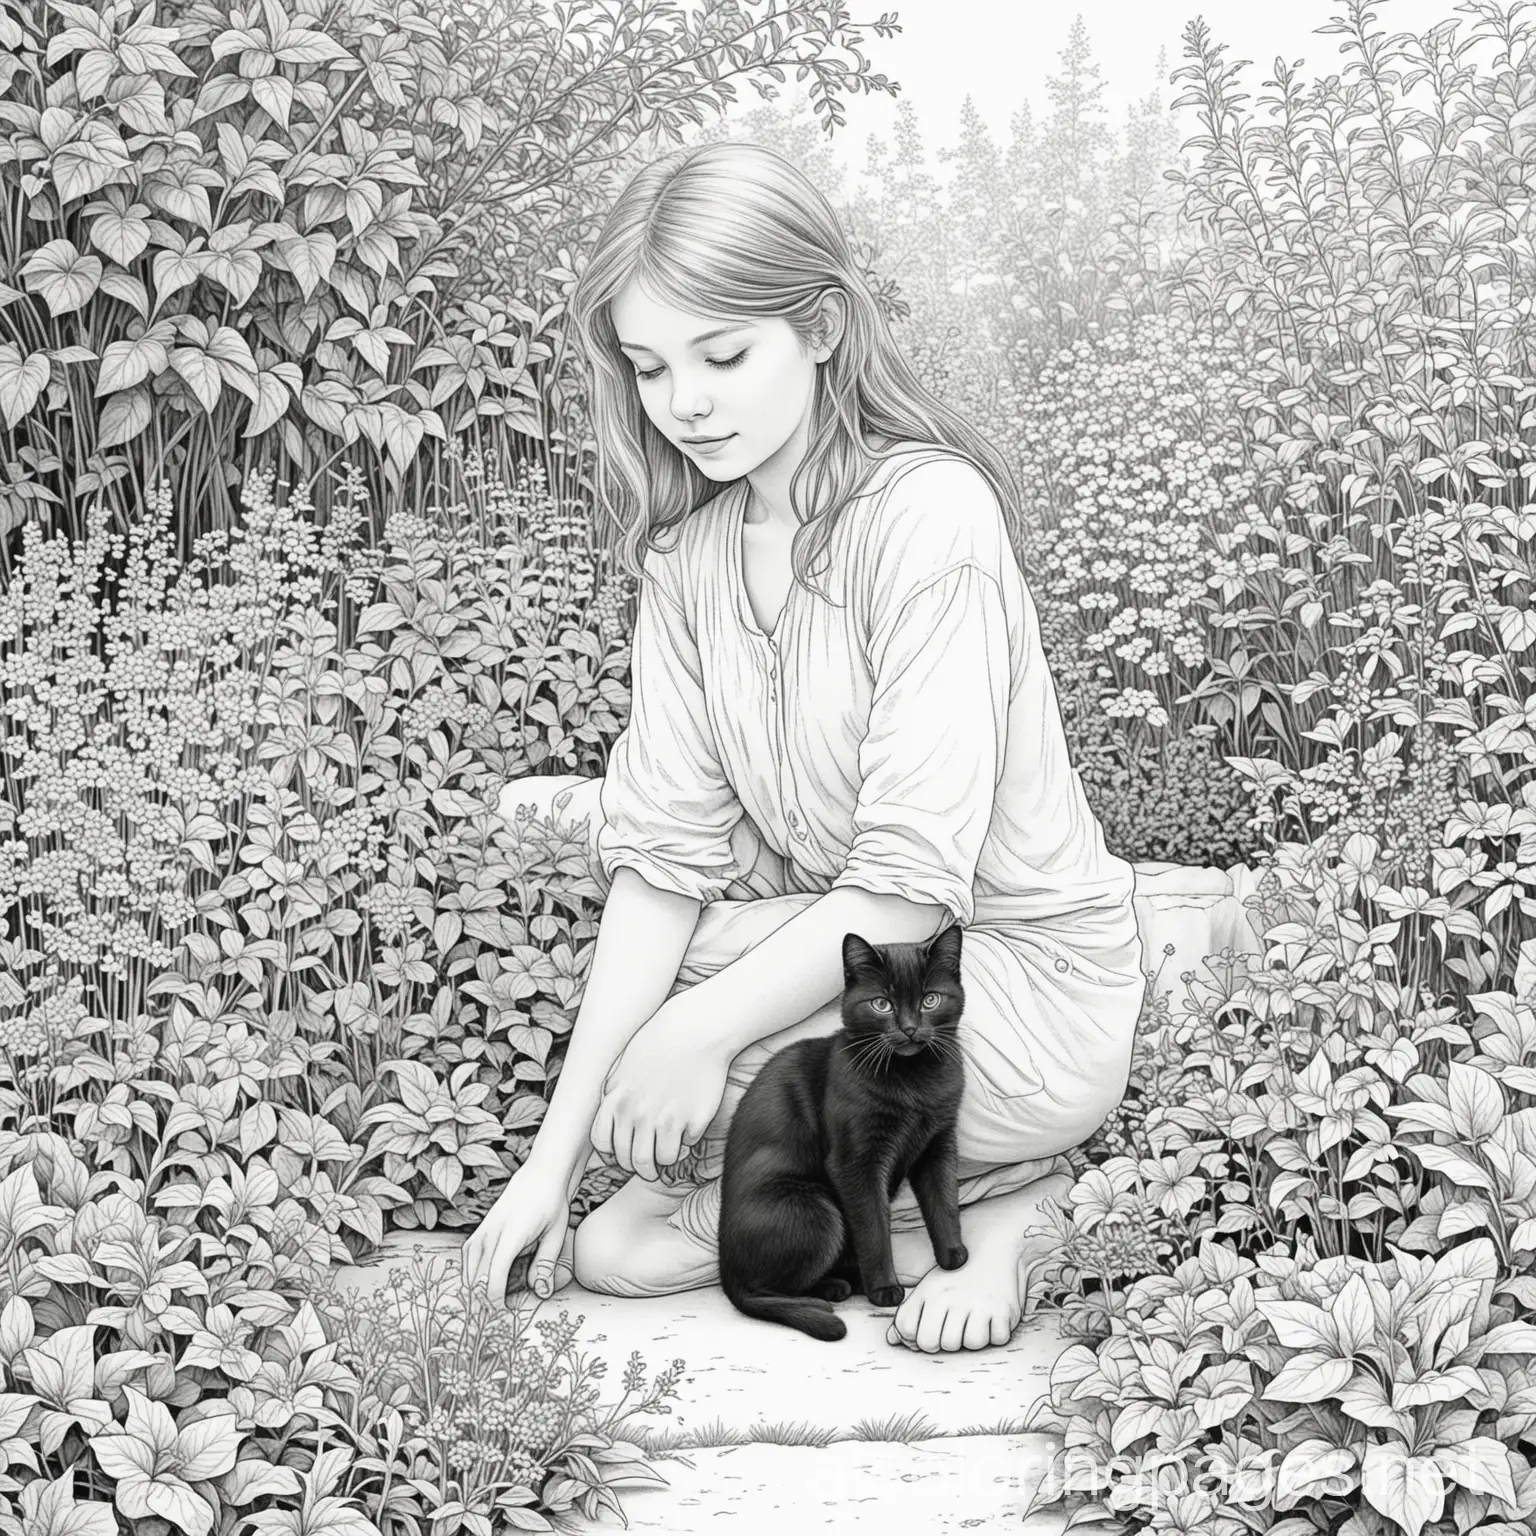 Kitty with girl in garden
, Coloring Page, black and white, line art, white background, Simplicity, Ample White Space. The background of the coloring page is plain white to make it easy for young children to color within the lines. The outlines of all the subjects are easy to distinguish, making it simple for kids to color without too much difficulty